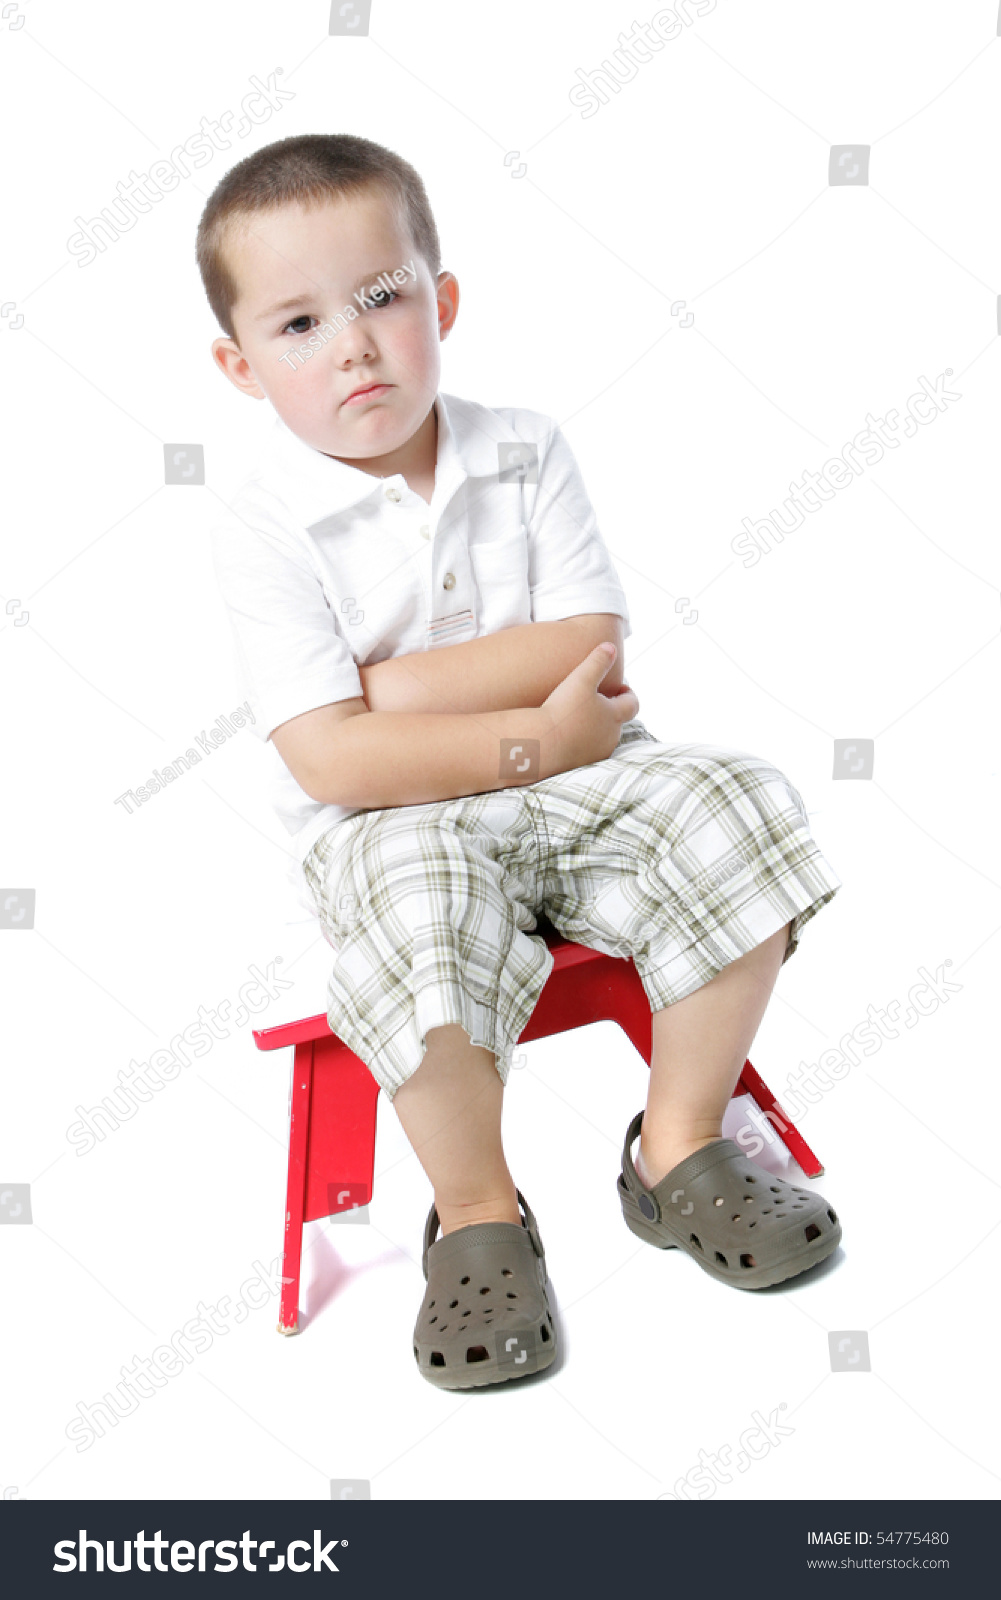 Cute Little Boy Sitting On A Red Stool And Pouting Stock Photo 54775480 ...